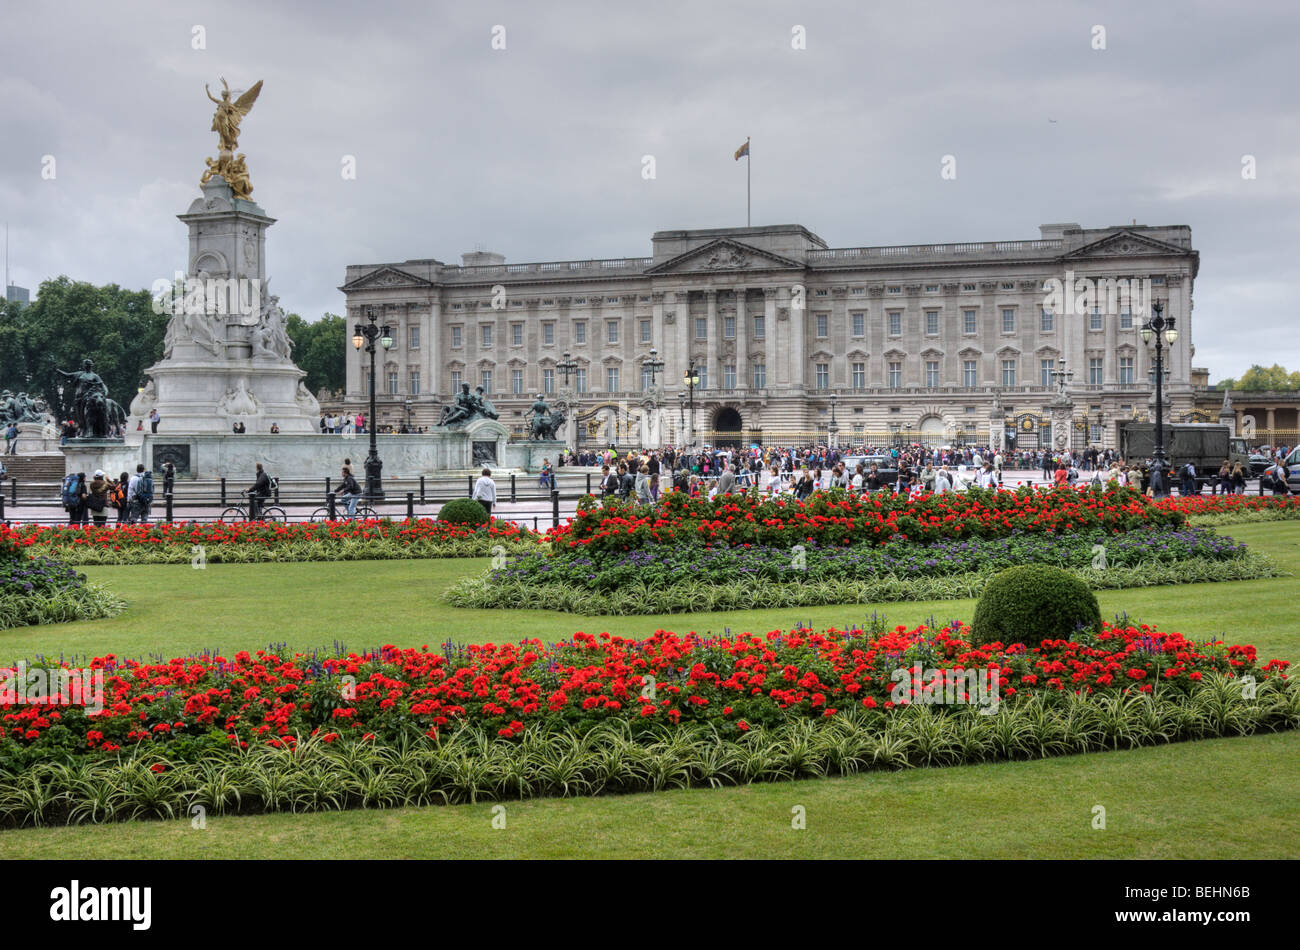 Buckingham Palace on a cloudy summer day, with flowers in a landscaped garden in front. Stock Photo